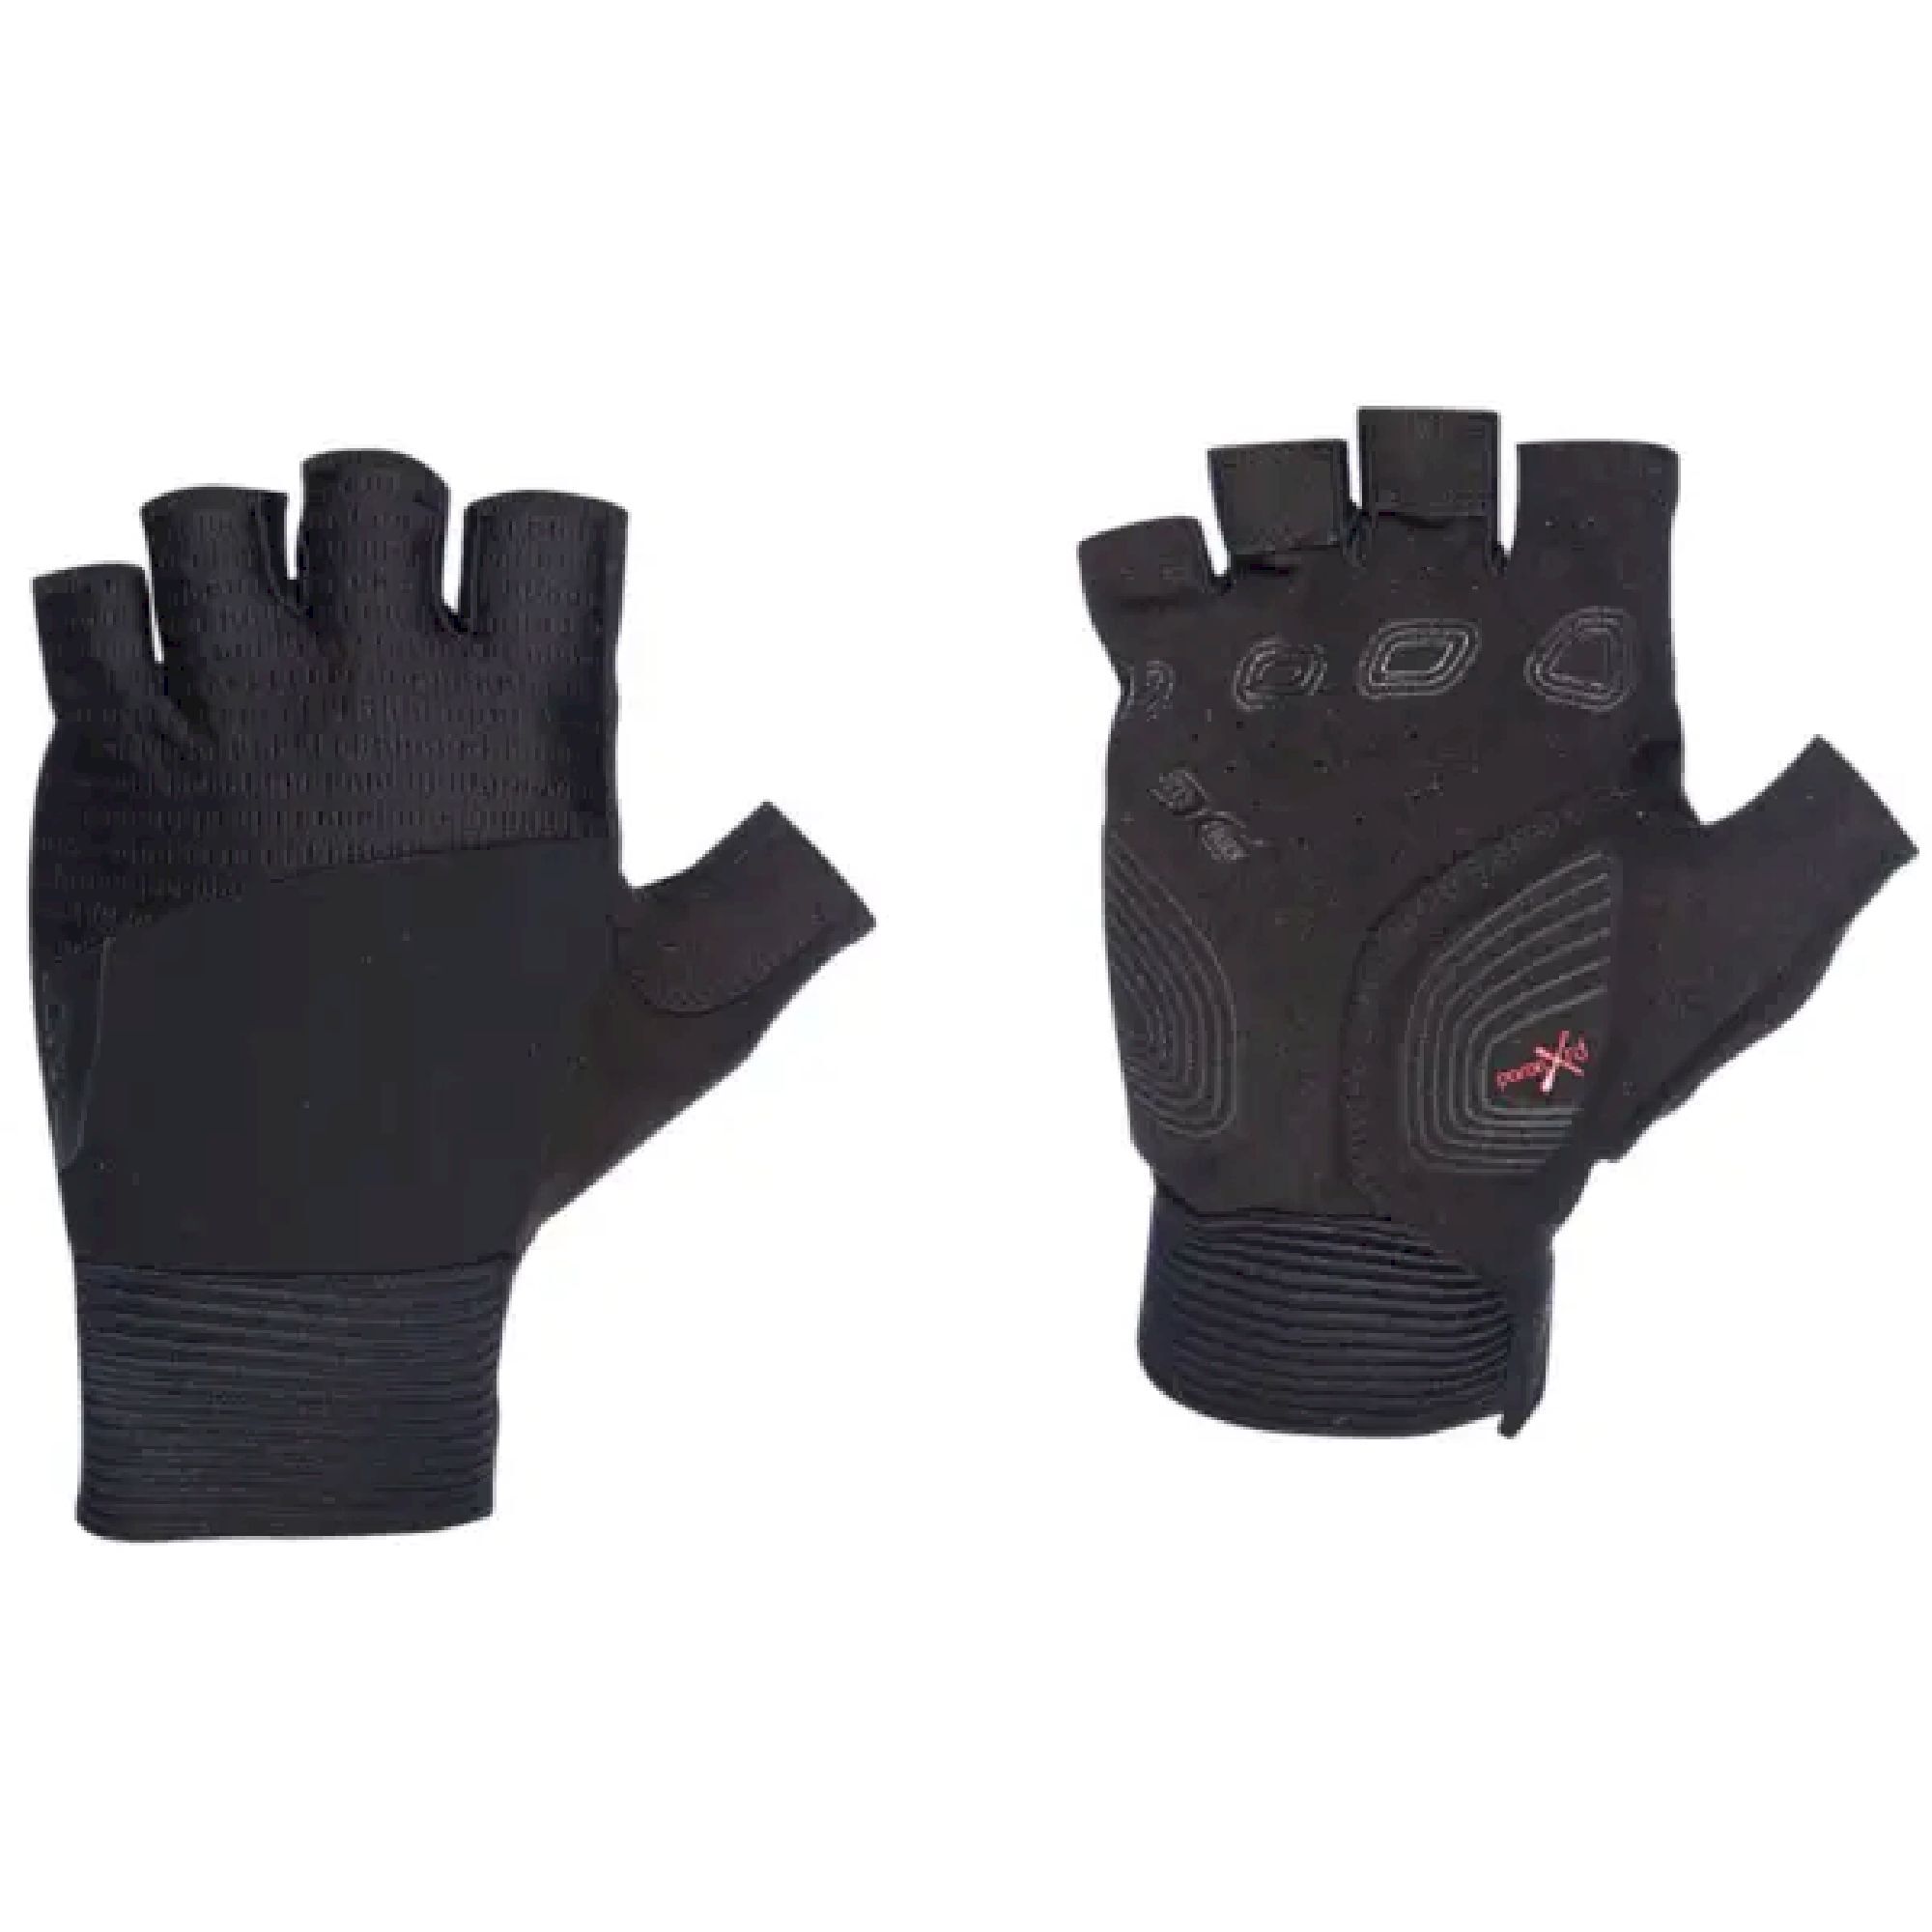 Northwave Extreme Pro Short Finger Glove - Guanti corti ciclismo | Hardloop